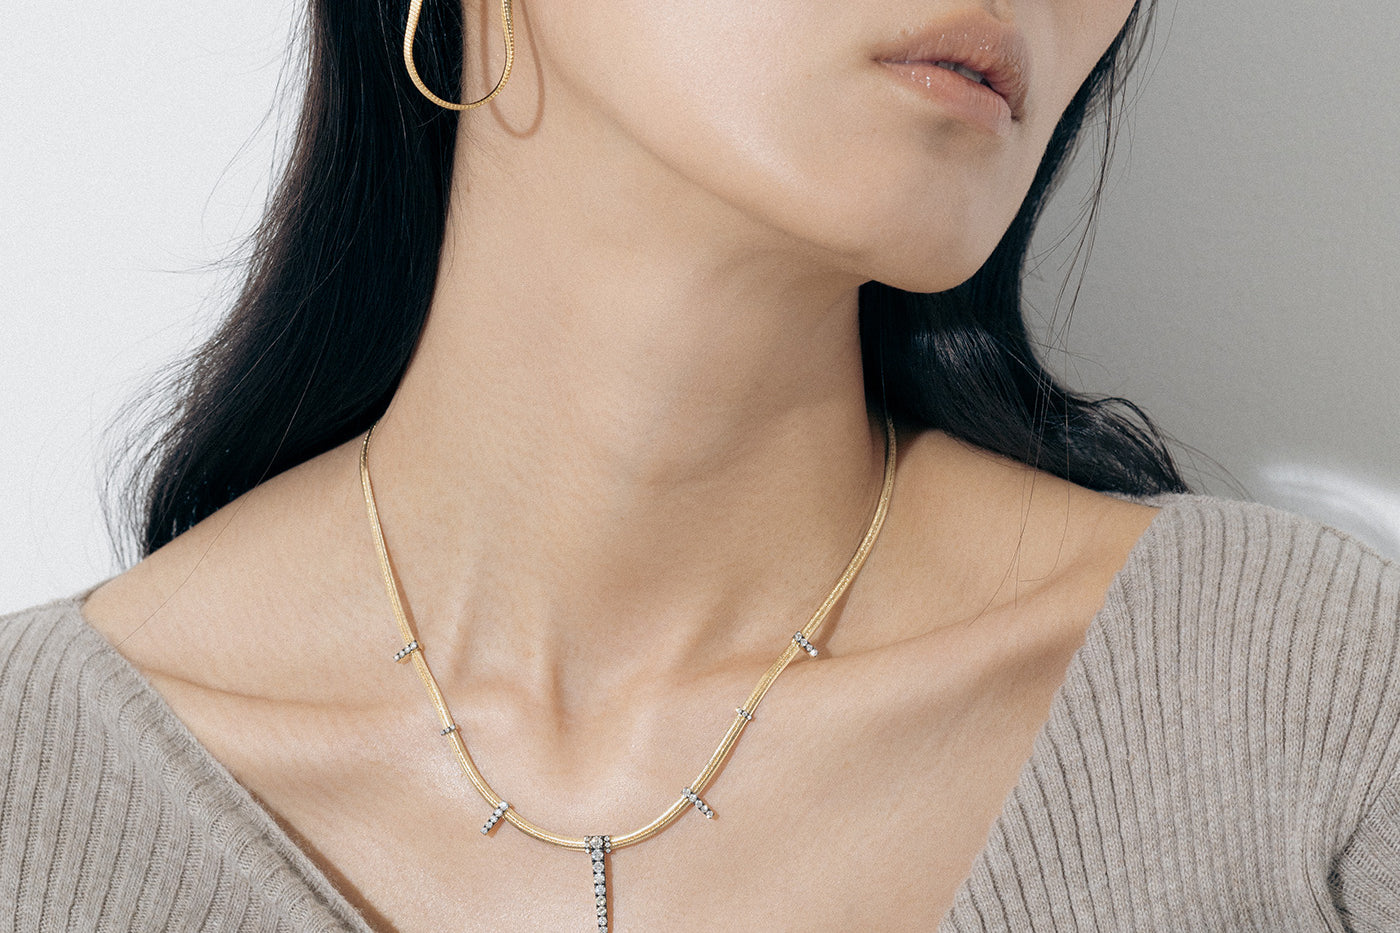 Yellow Gold Necklace with seven Diamond-lined, Rhodium plated rays spaced out along it - Model shot